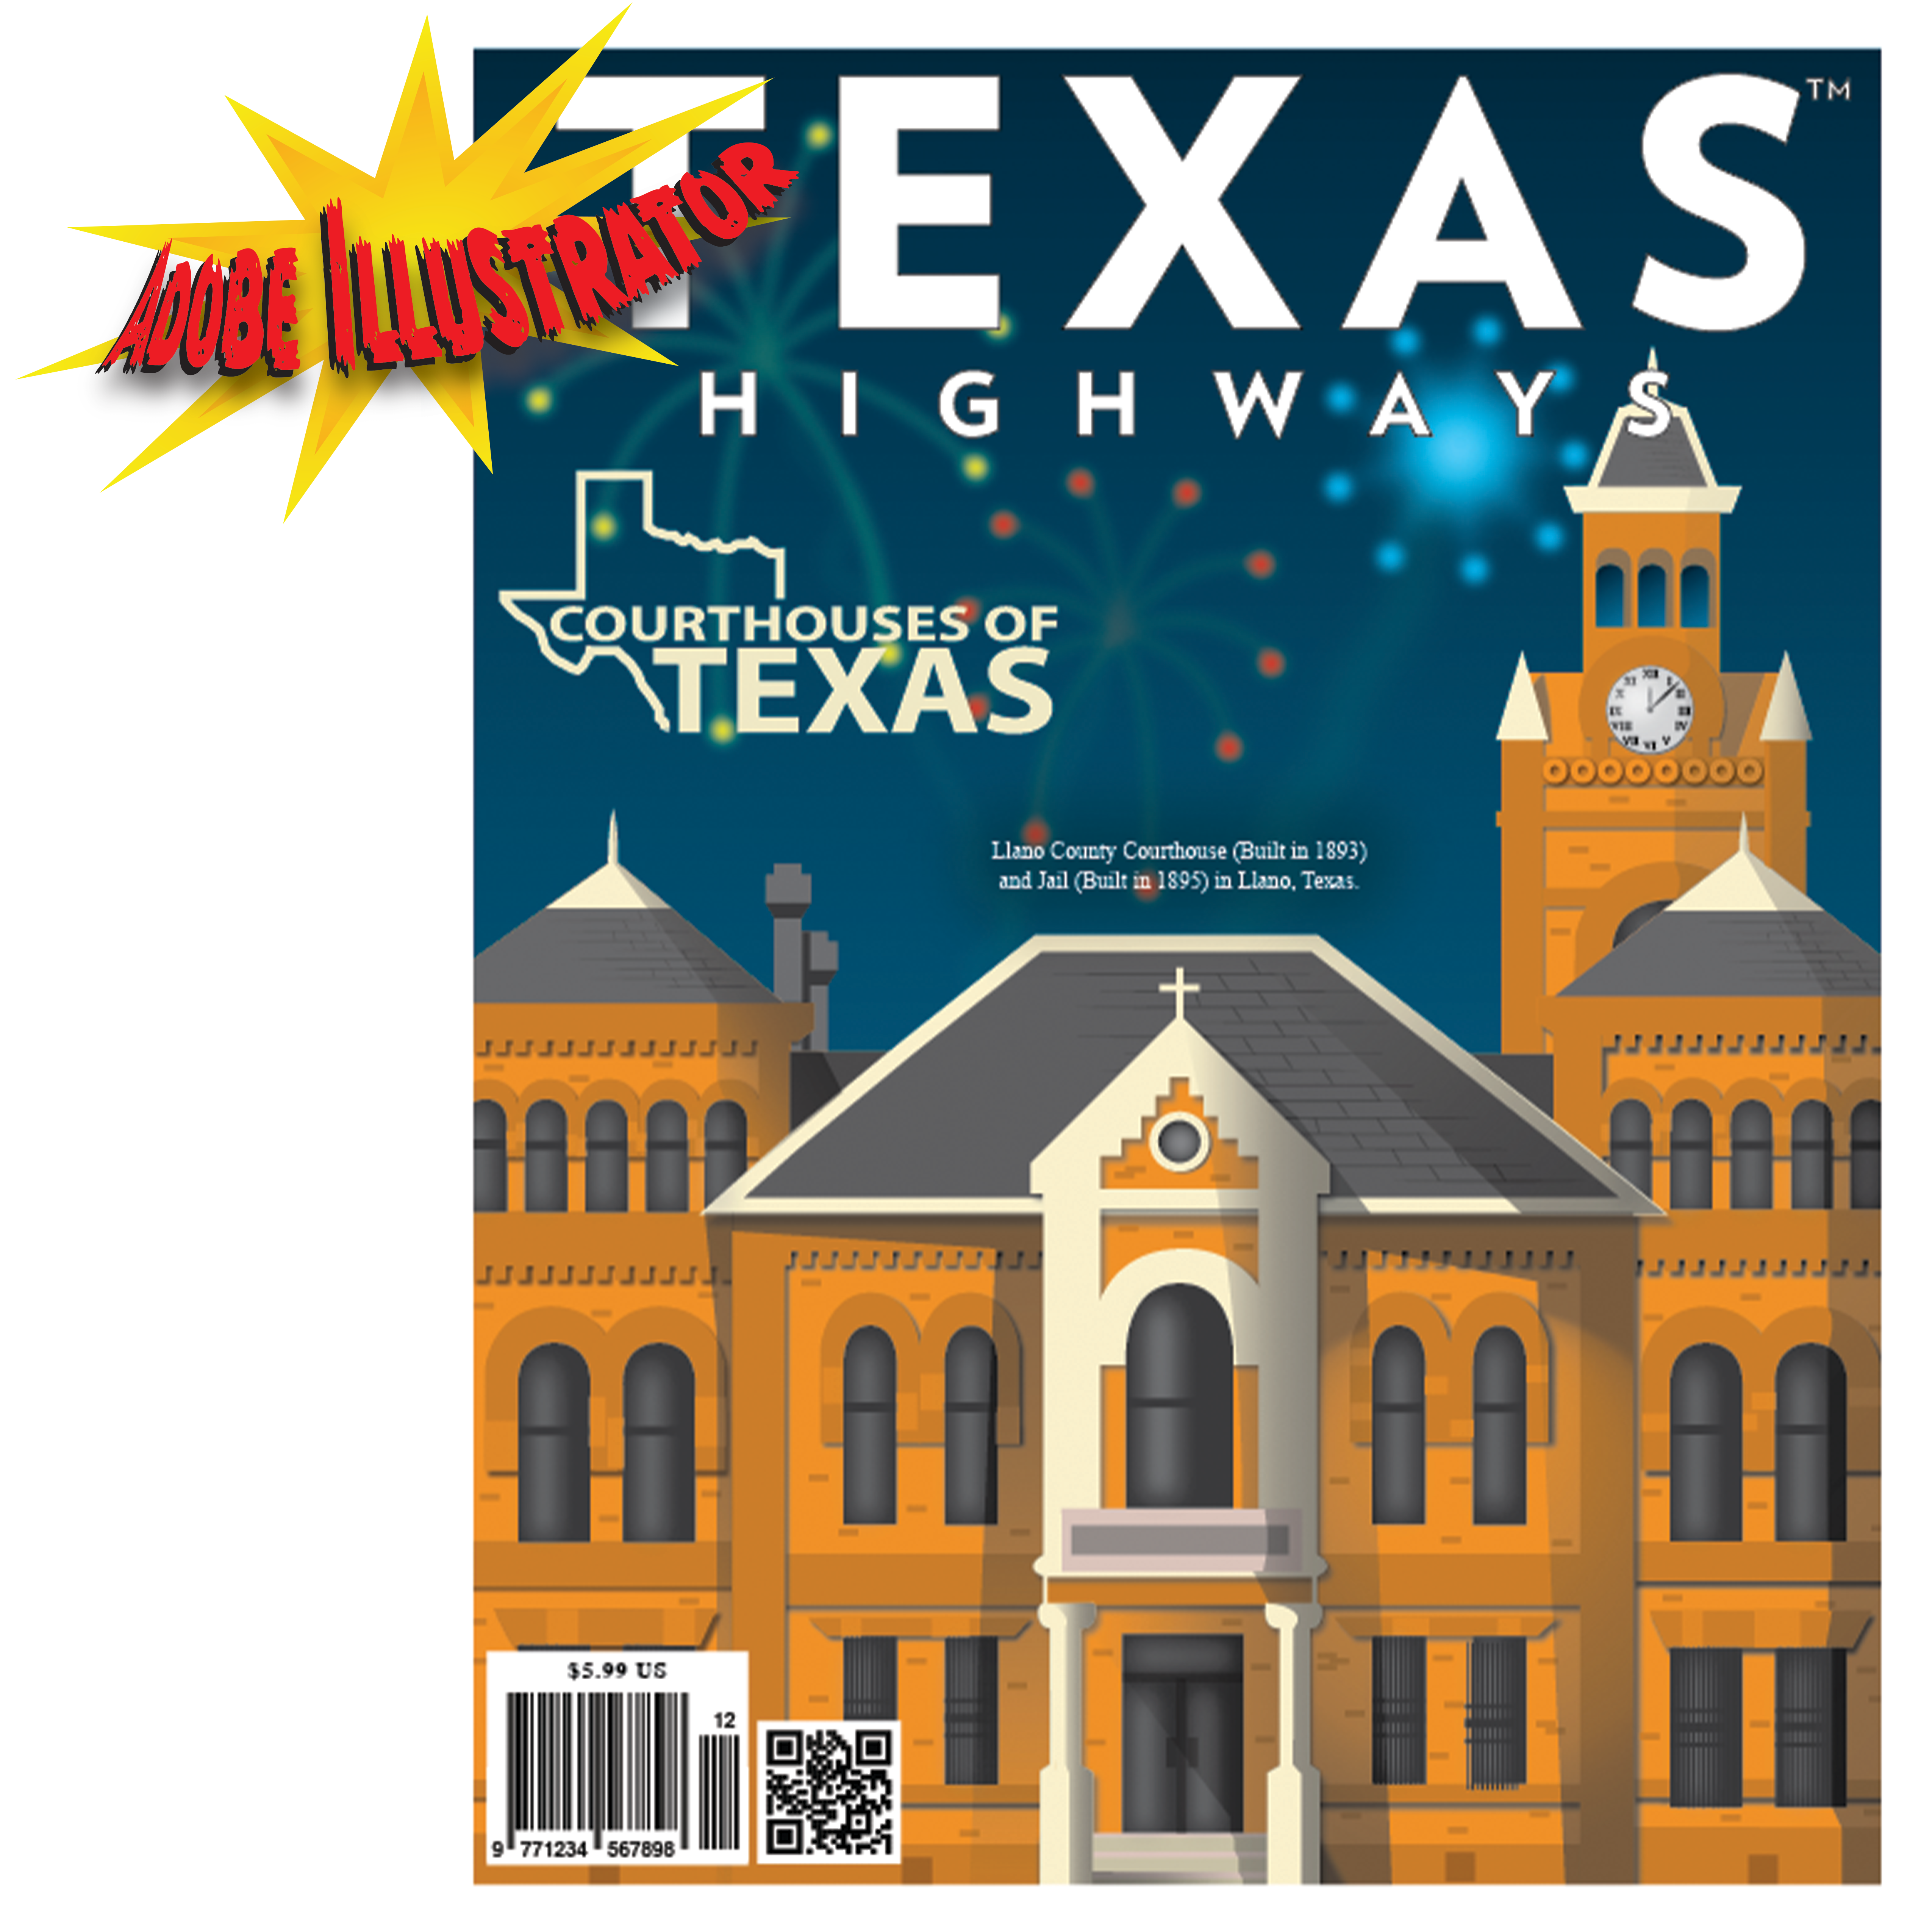 Cover for Texas Highways Courthouses of Texas. Created with Adobe Illustrator.